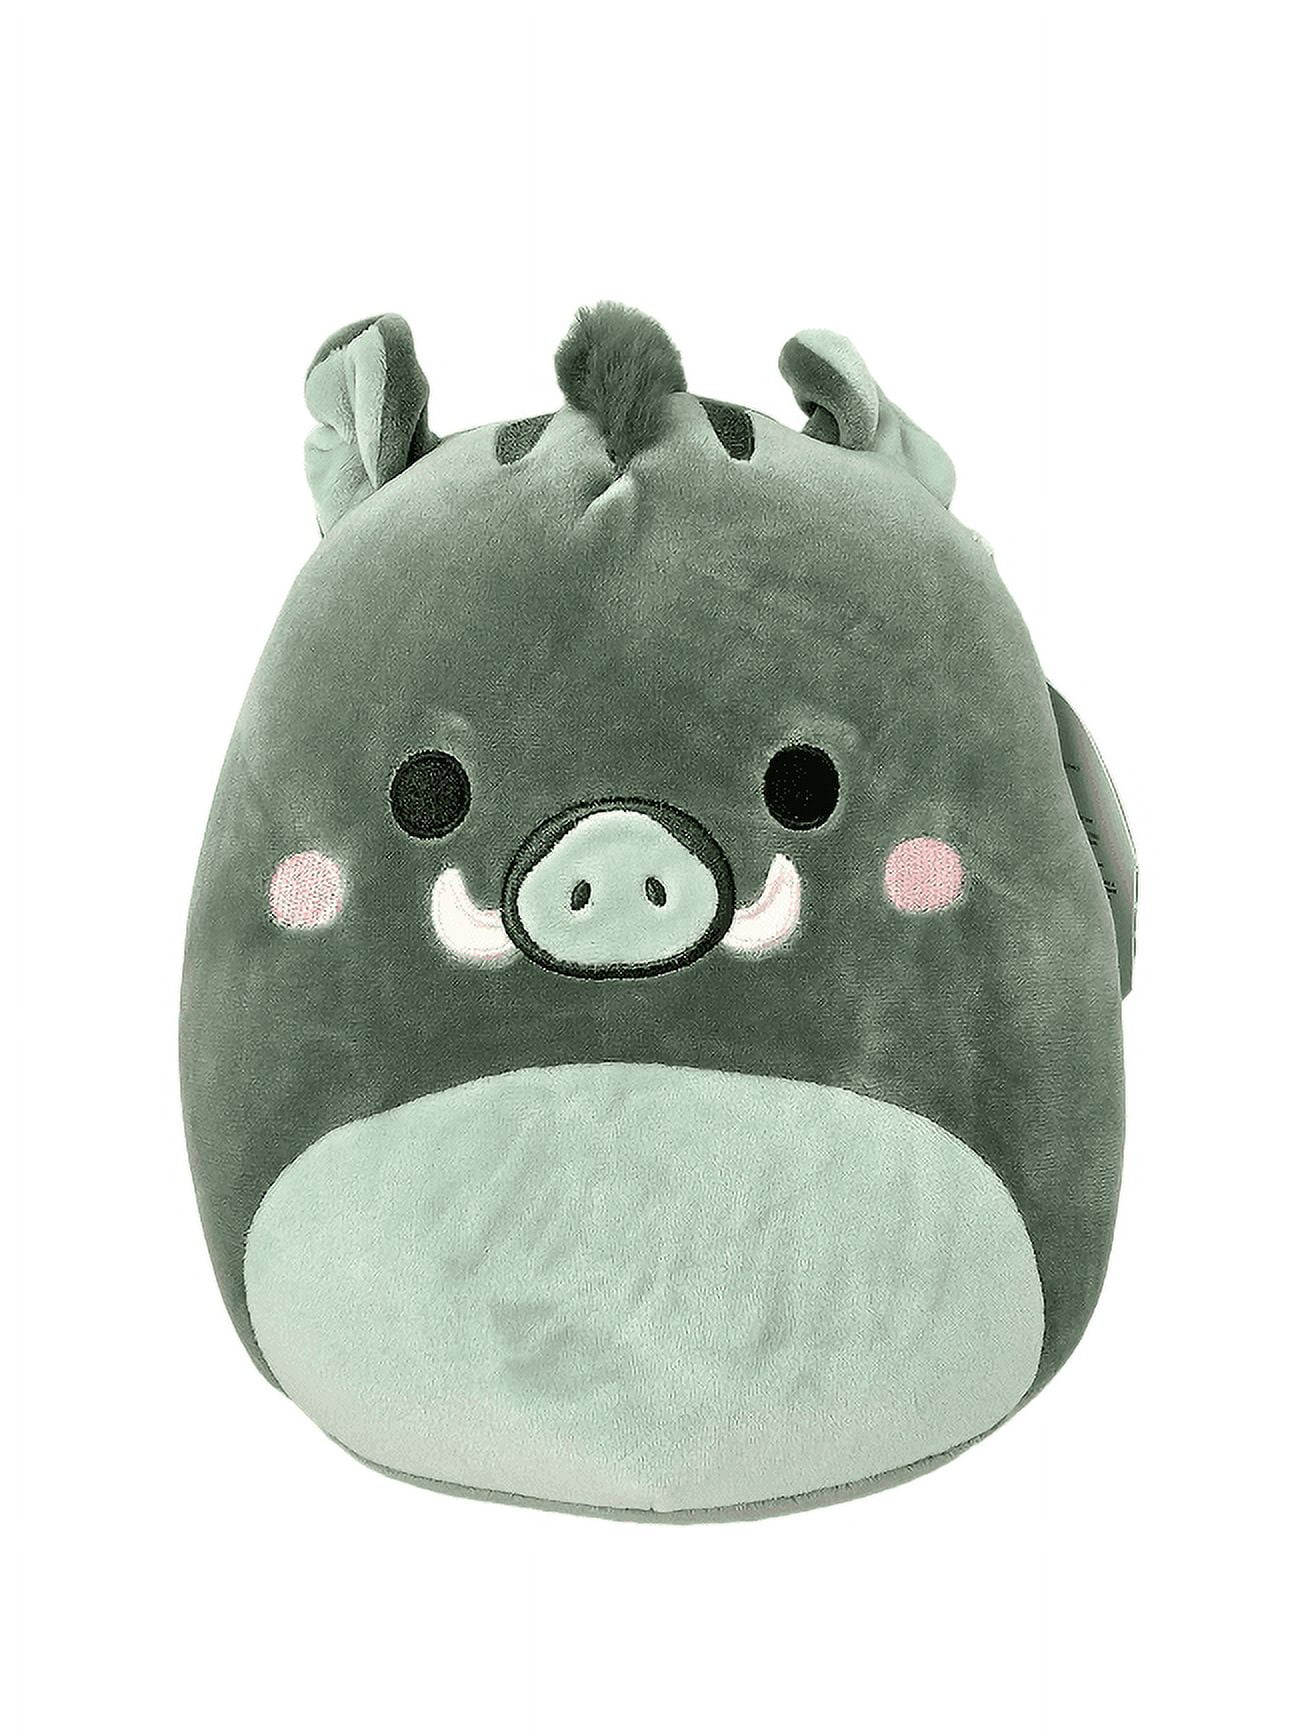 Squishmallows Official Kellytoys Plush 8 Inch Tonya the Forest Green Boar  Special edition Tag Ultimate Soft Plush Stuffed Toy